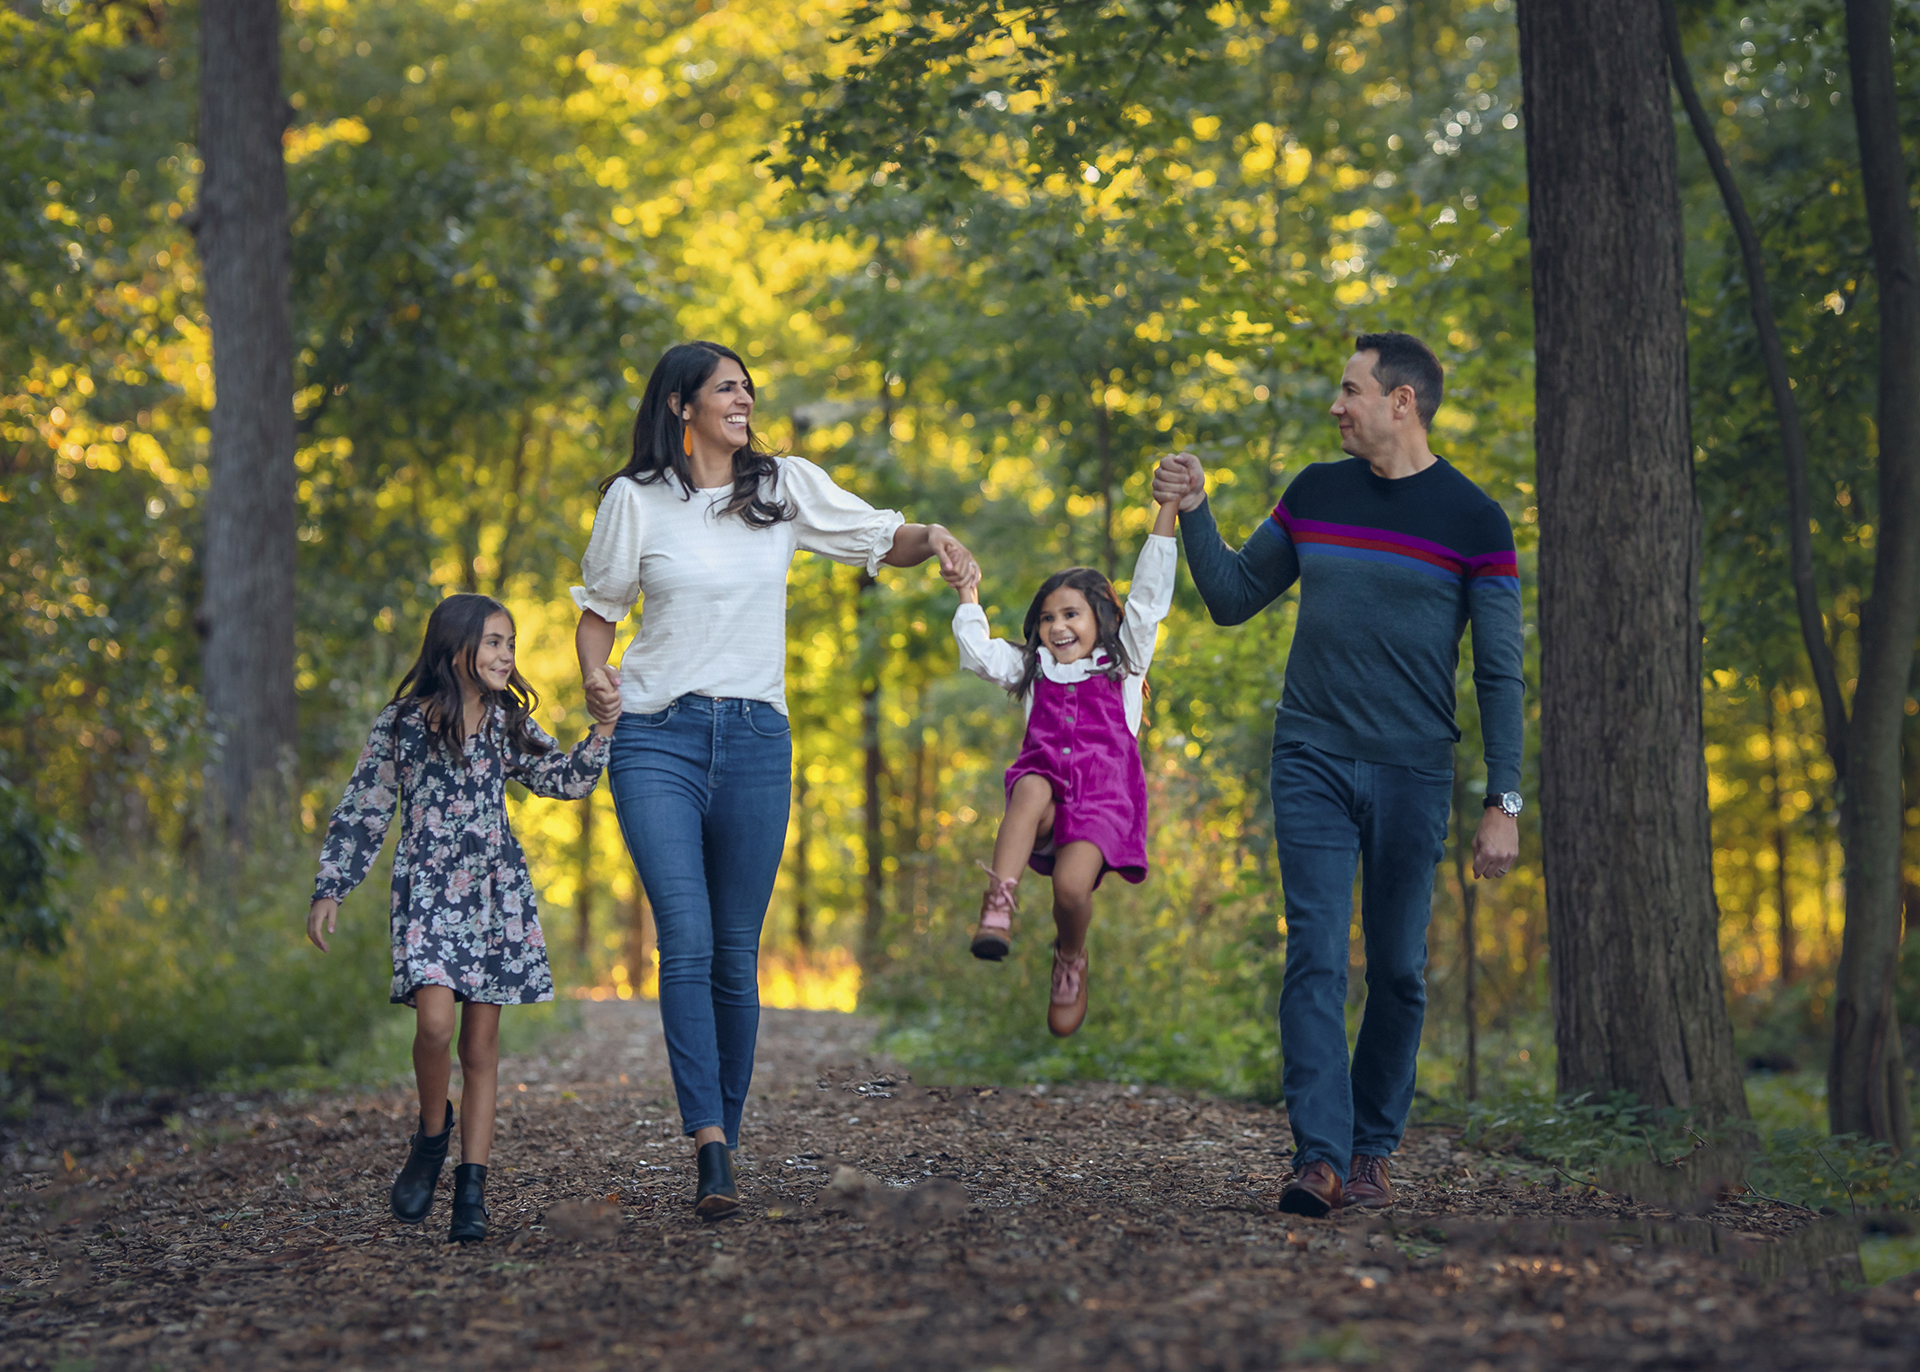 Local Detroit family photographer captures family portrait of a couple walking through the forest with their children, holding hands.